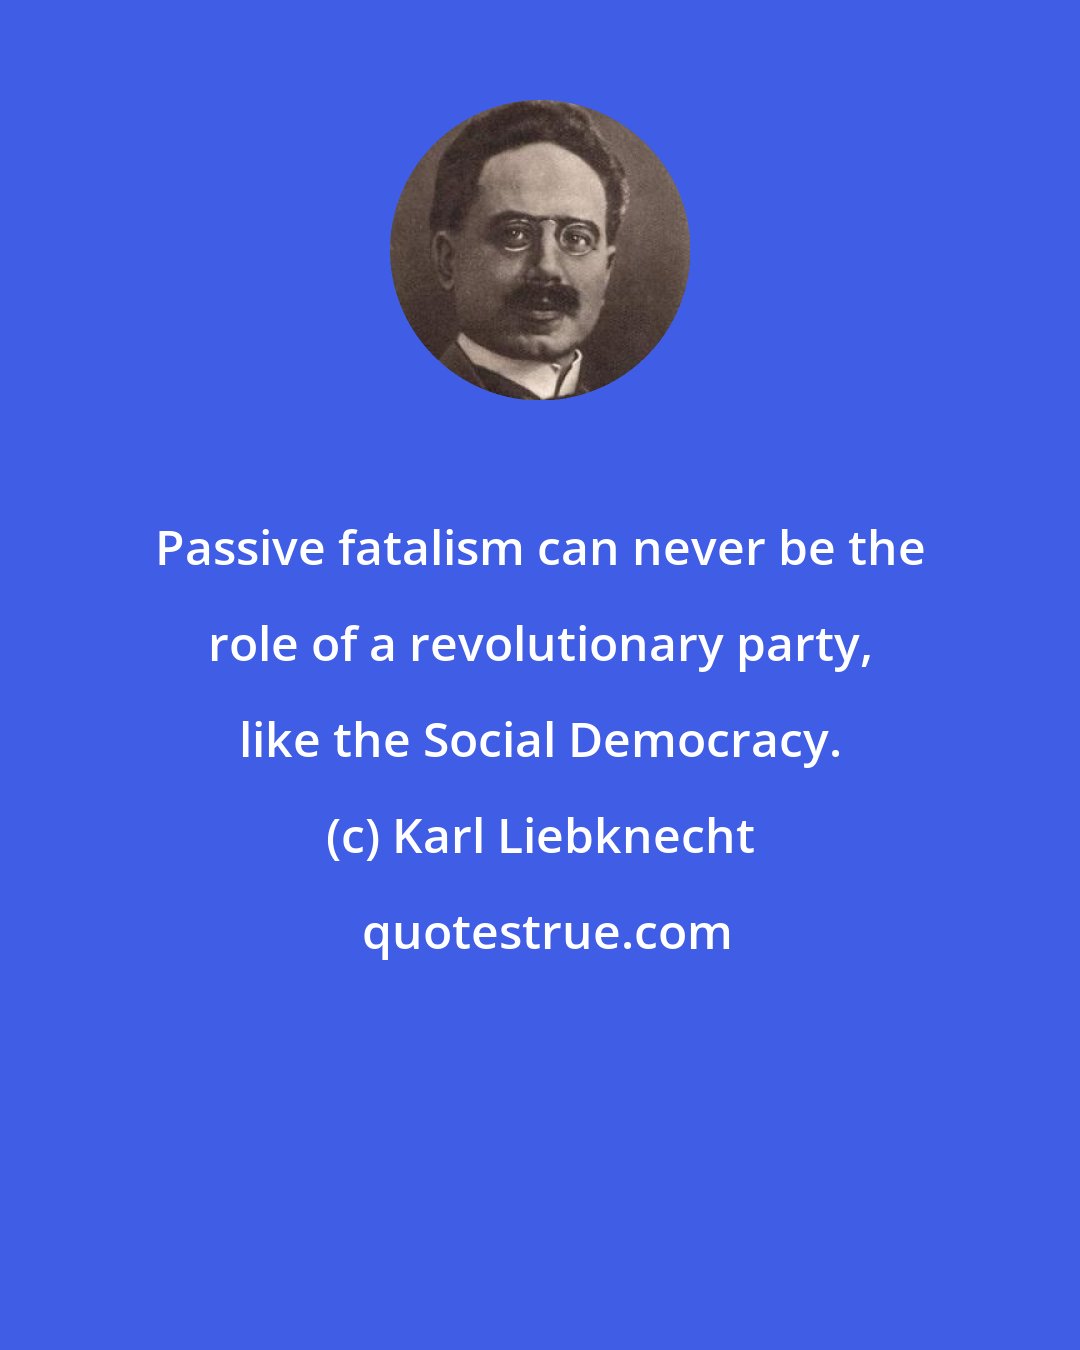 Karl Liebknecht: Passive fatalism can never be the role of a revolutionary party, like the Social Democracy.